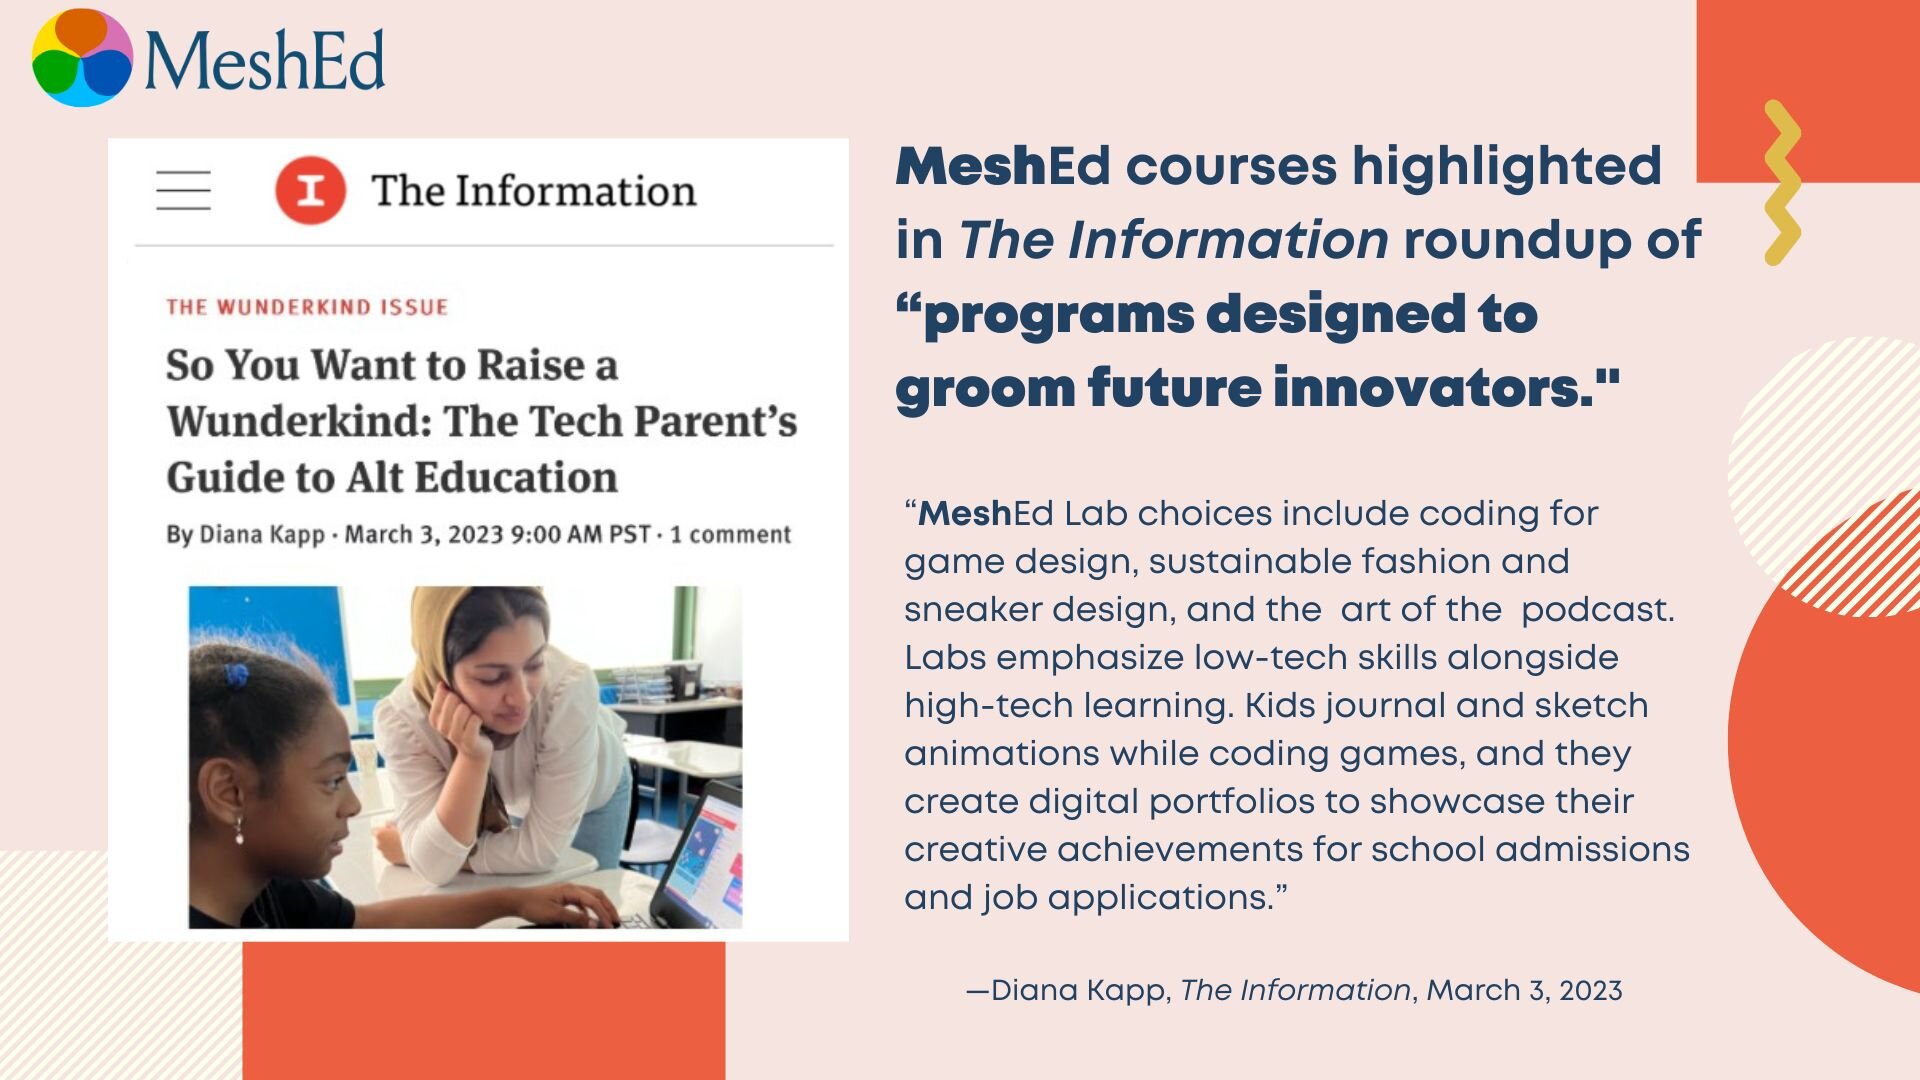 We're thrilled that Diana Kapp @dianakapp spotlighted us in this weekend's &quot;The Tech Parent's Guide to Alt Education&quot; in The Information! 

find the full article here @theinformation : https://www.theinformation.com/articles/so-you-want-to-